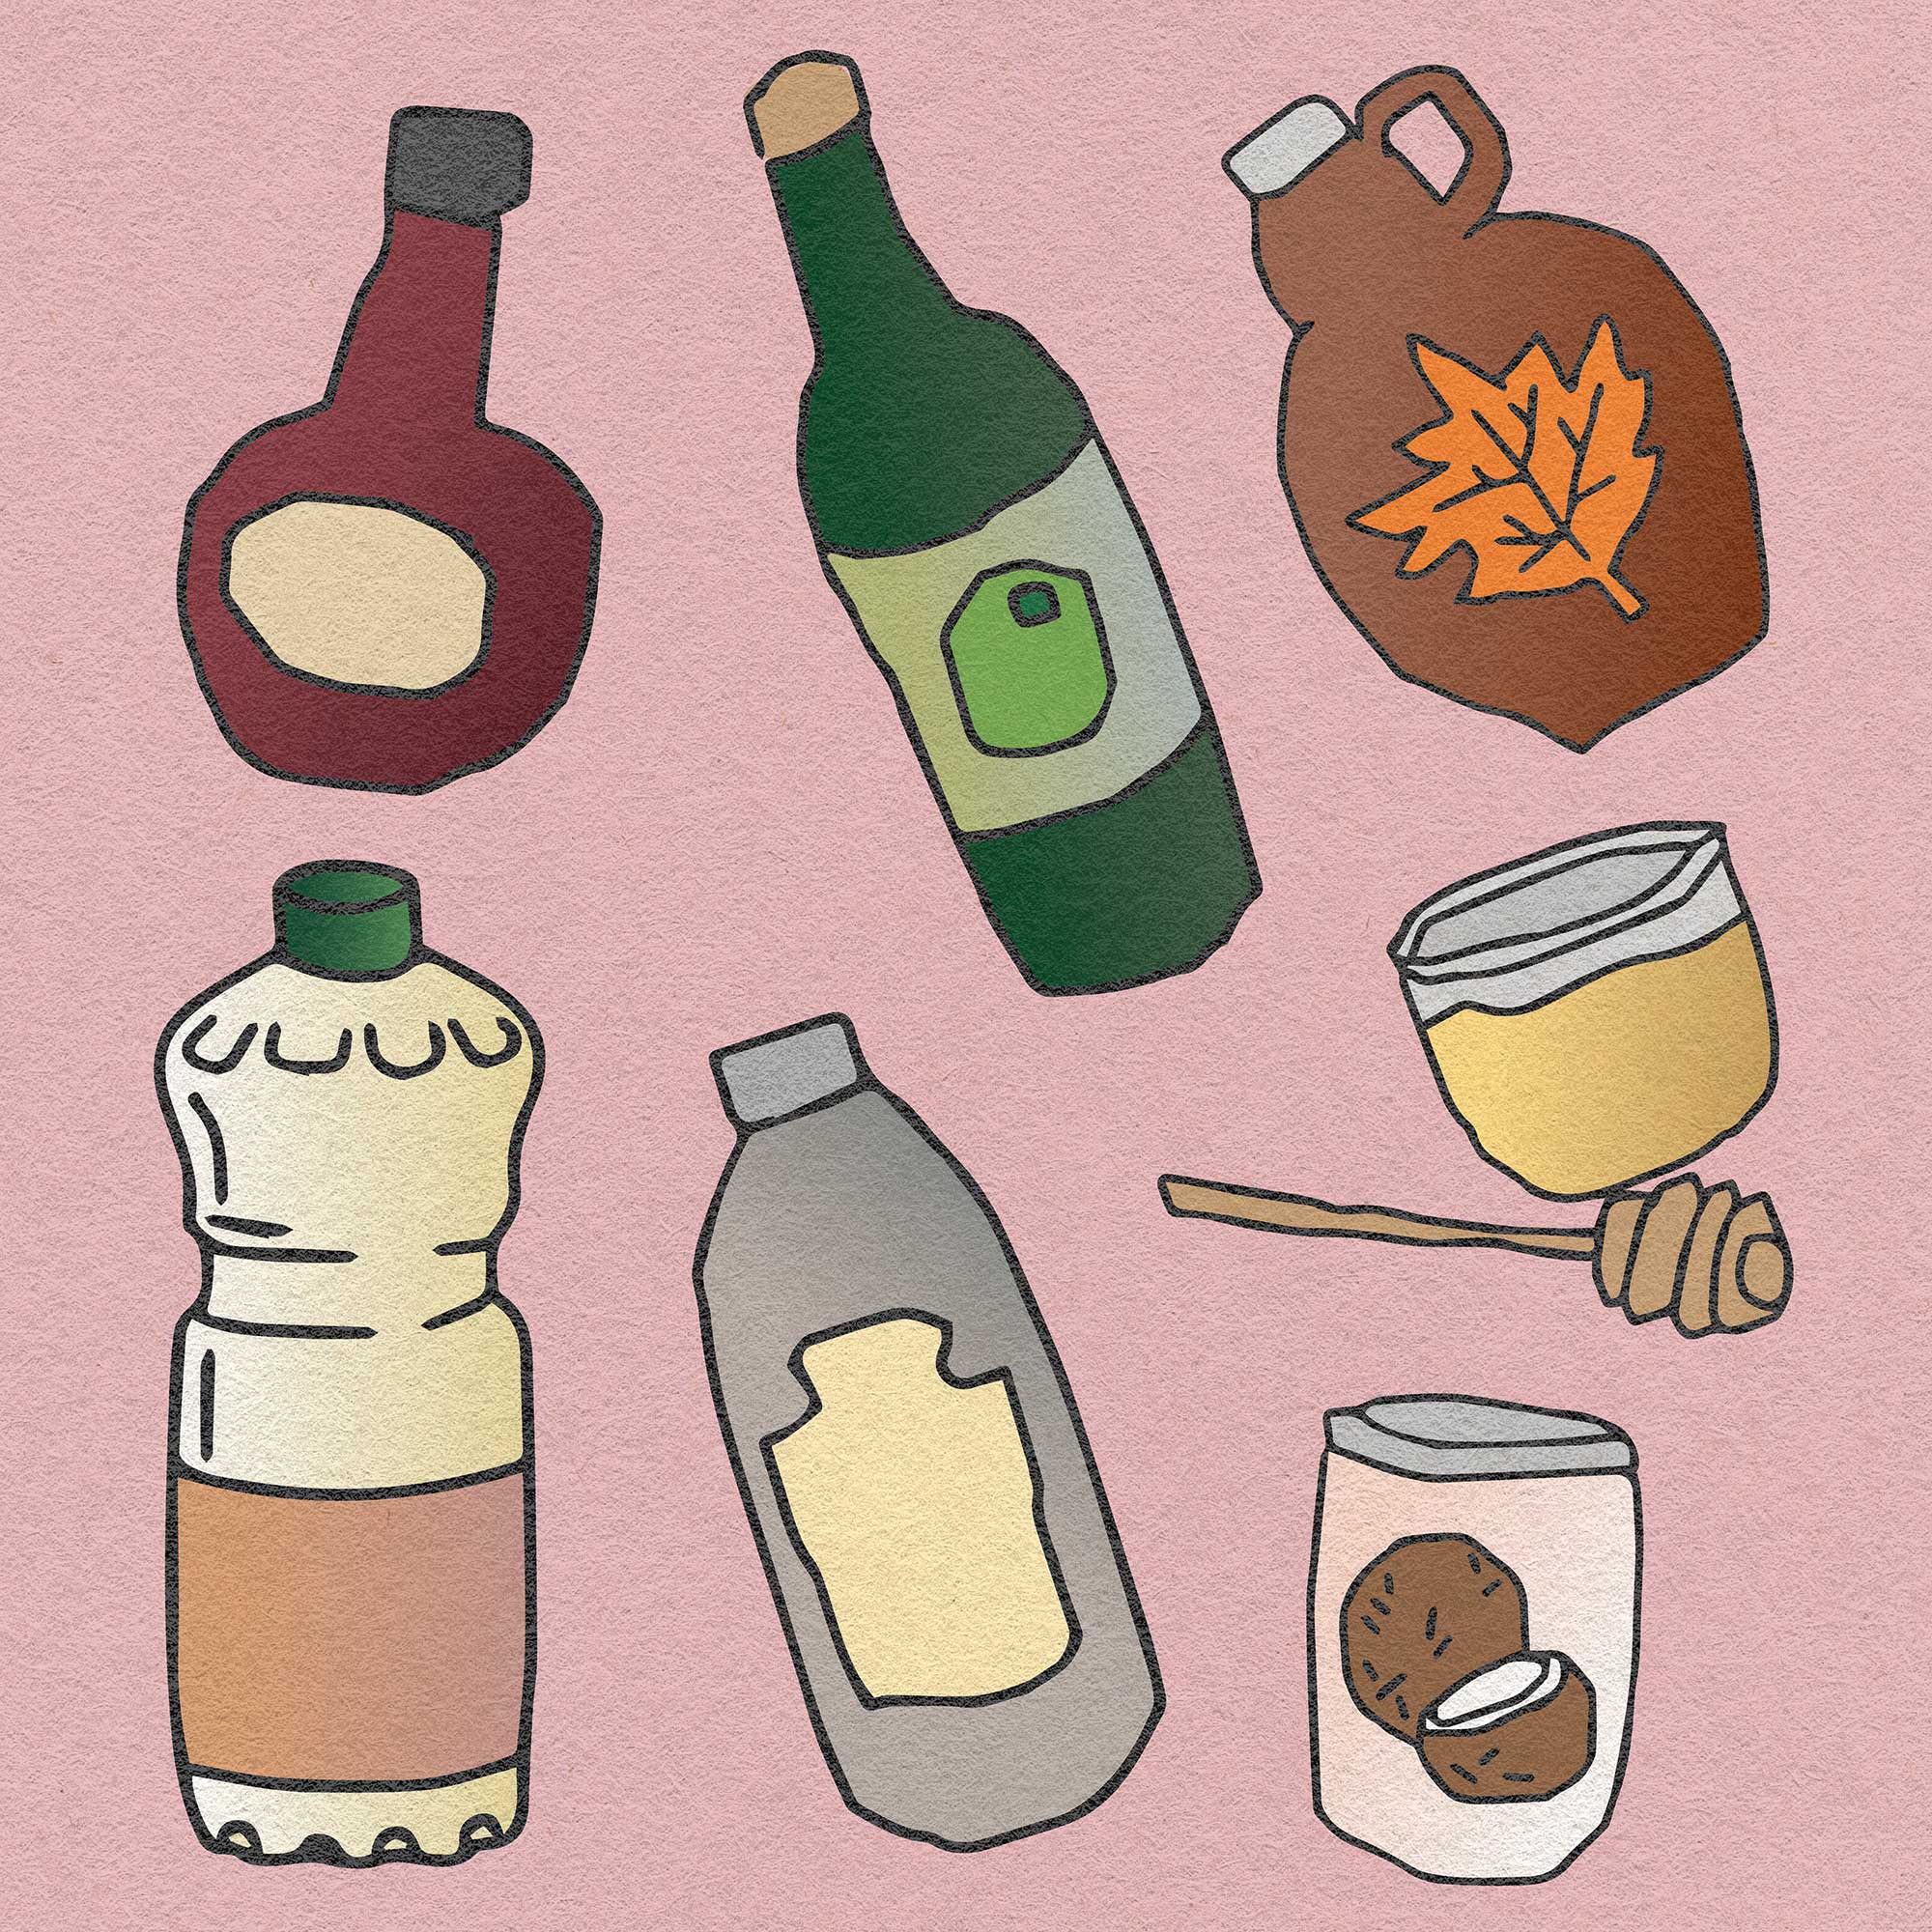 Illustration of gluten-free condiments on a rose colored background